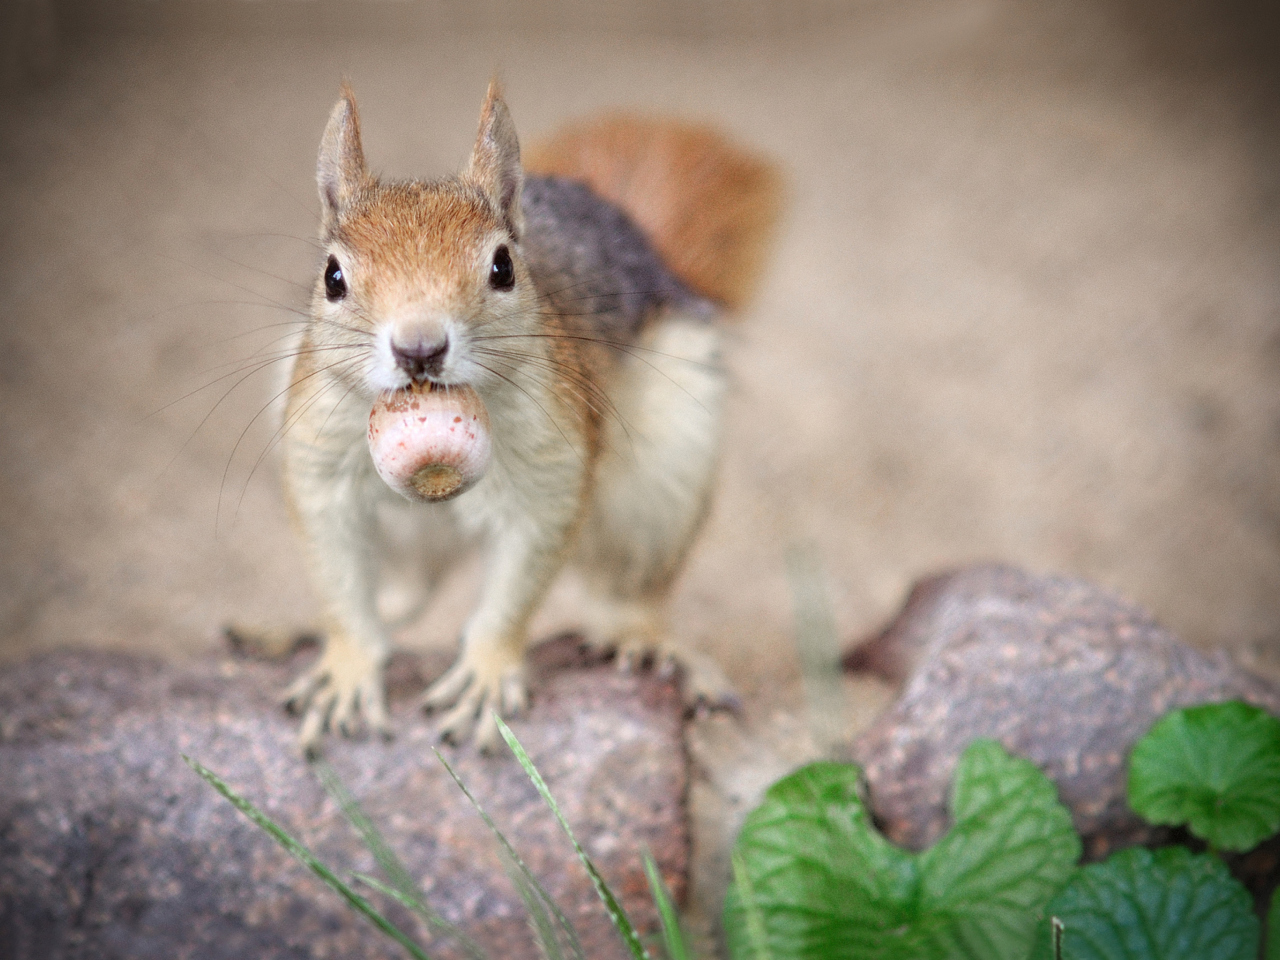 Funny Squirrel With Nut wallpaper 1280x960